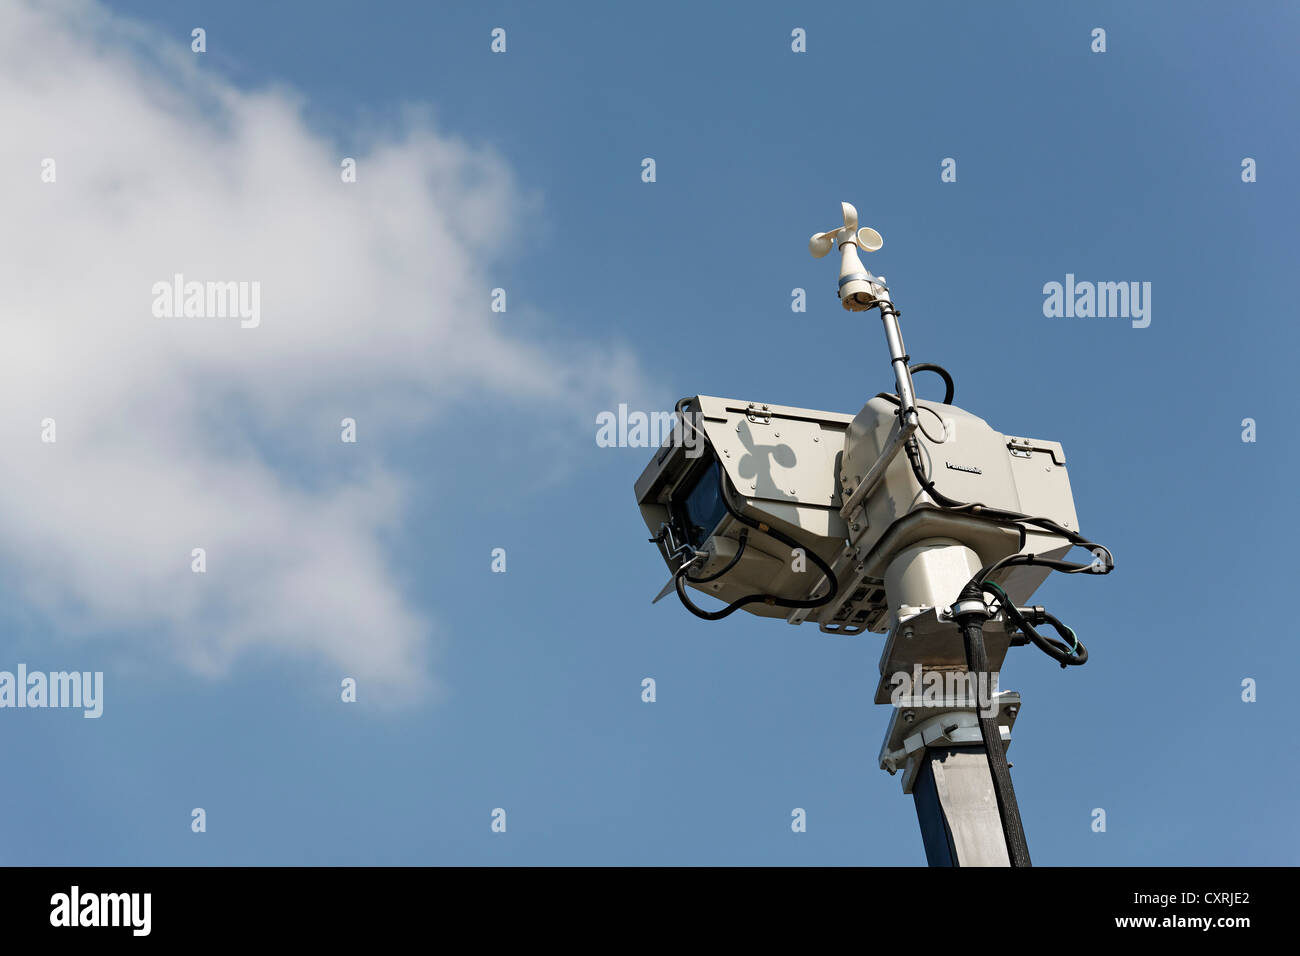 Panorama Platform High Resolution Stock Photography and Images - Alamy